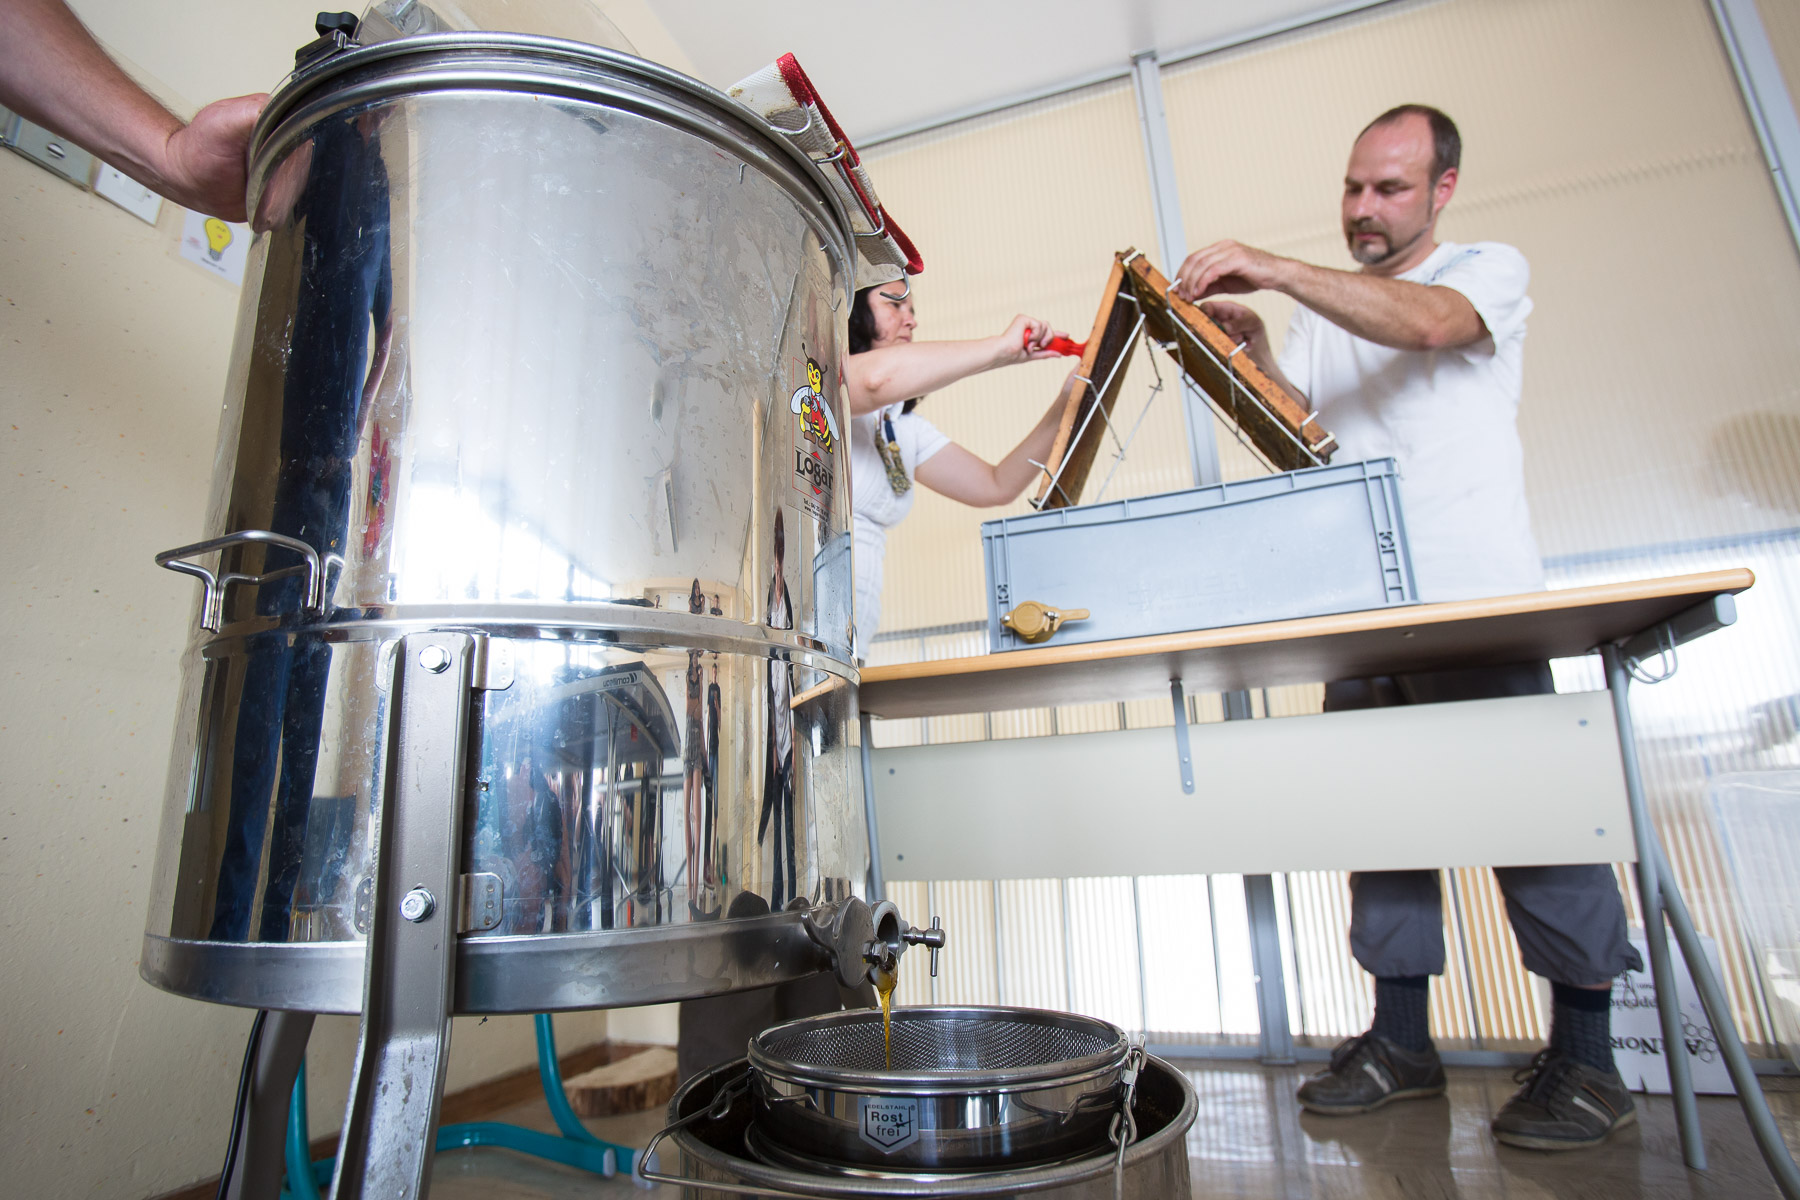 By the end of May the first honey is being collected at the Secondary School of Trade in Ljubljana.